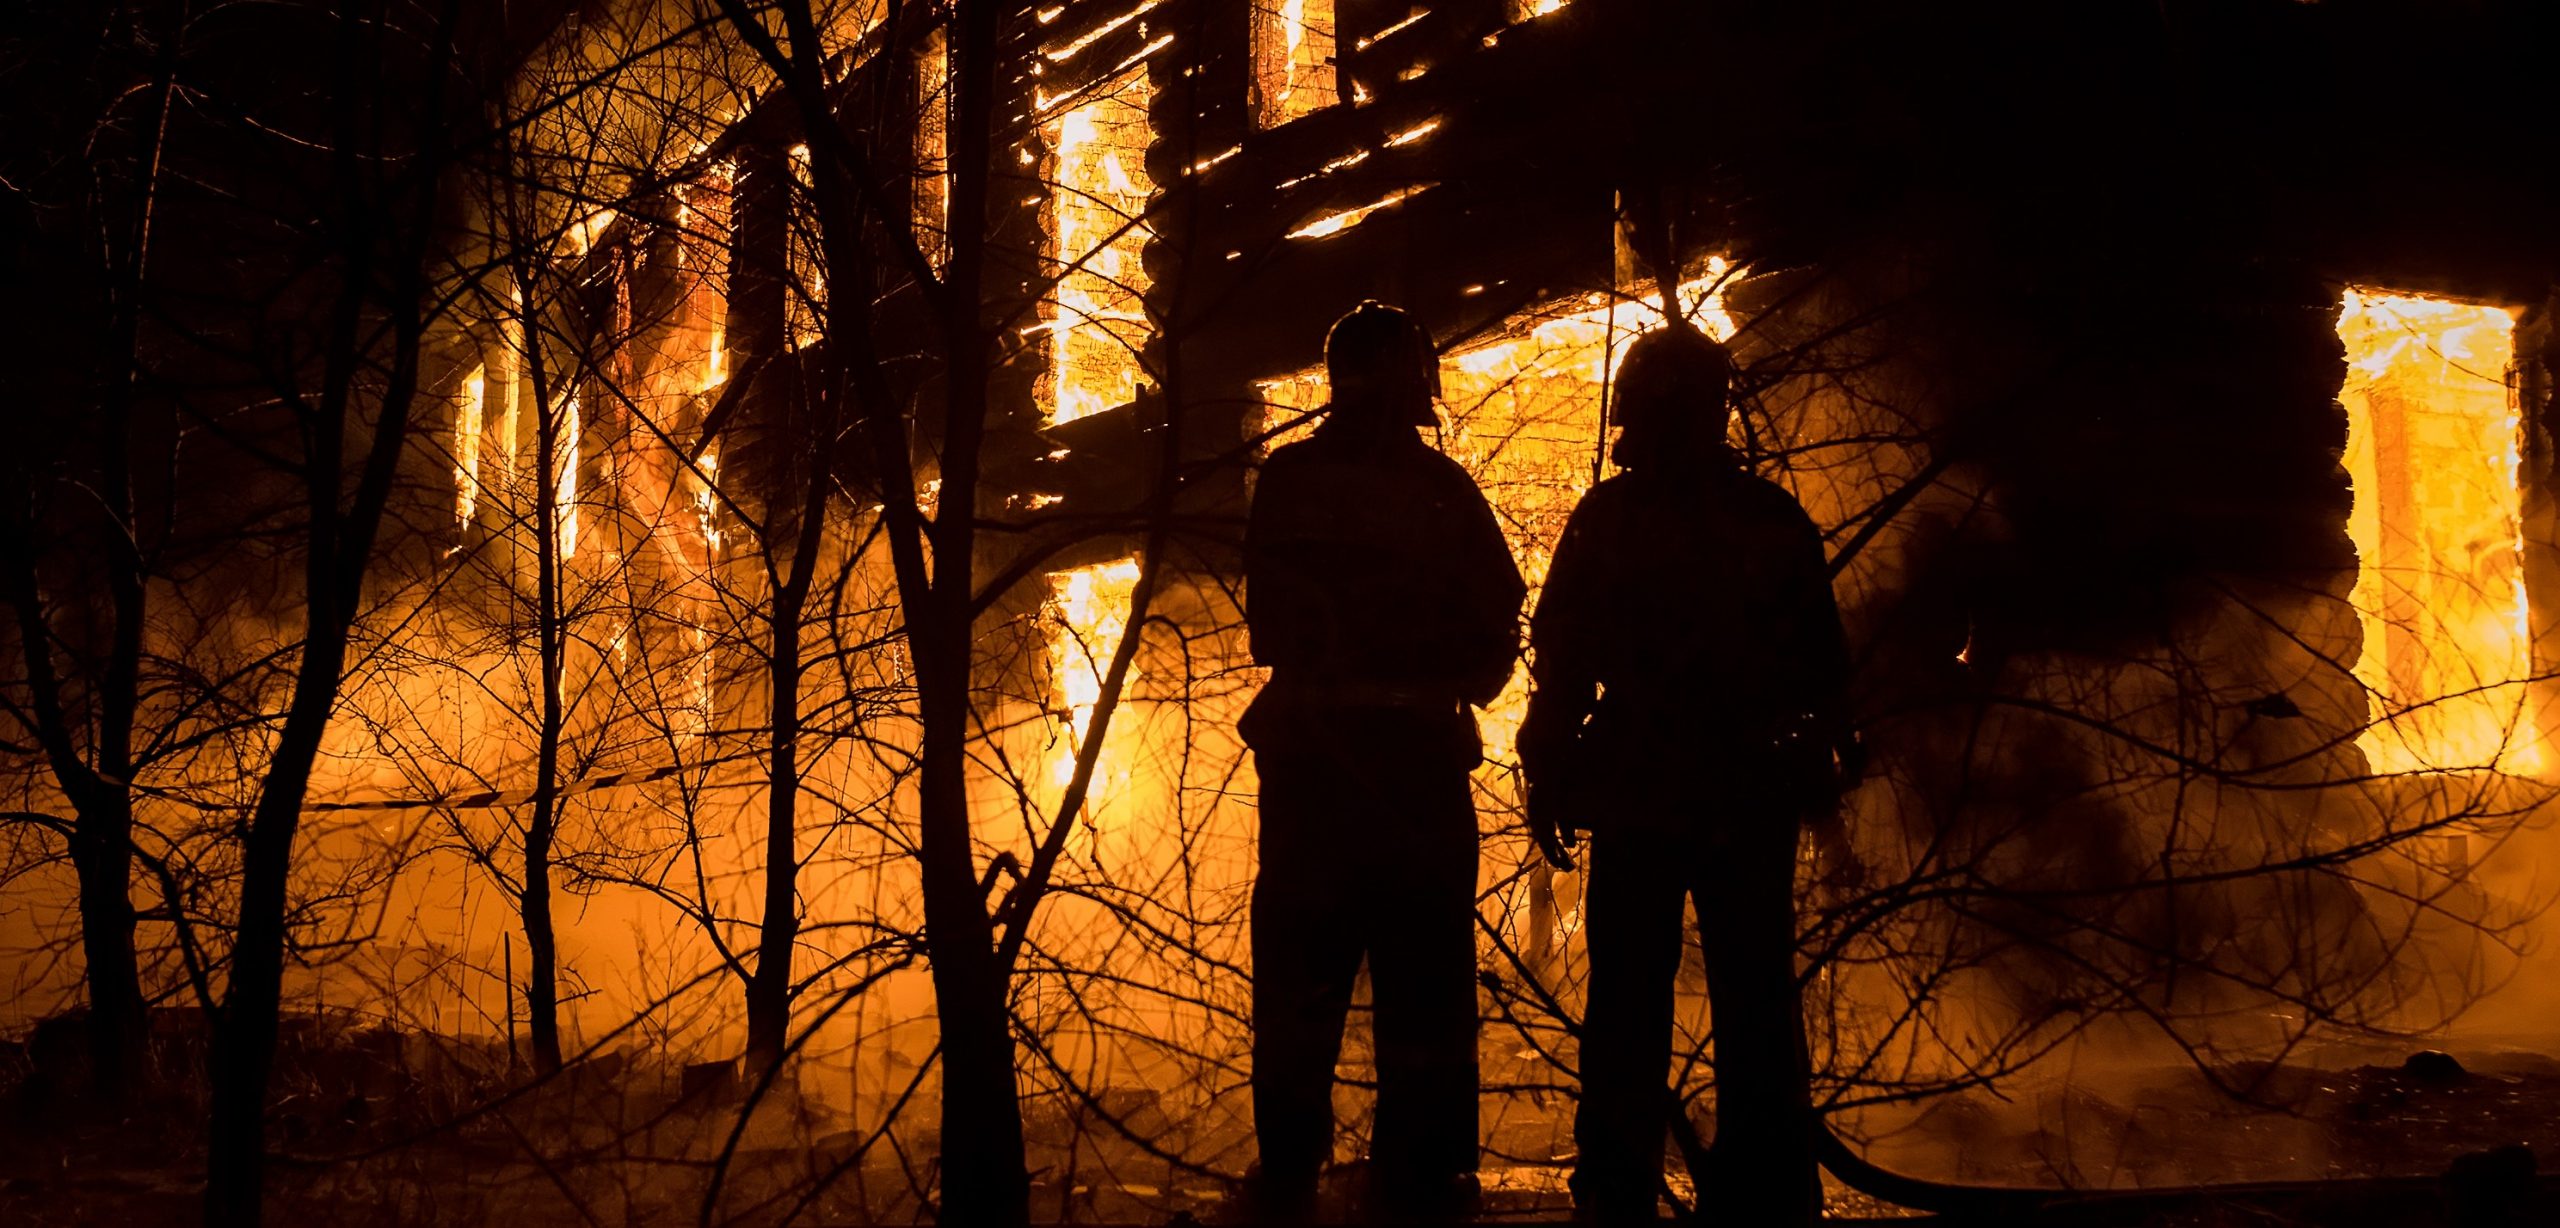 Silhouette of two people beside building on fire